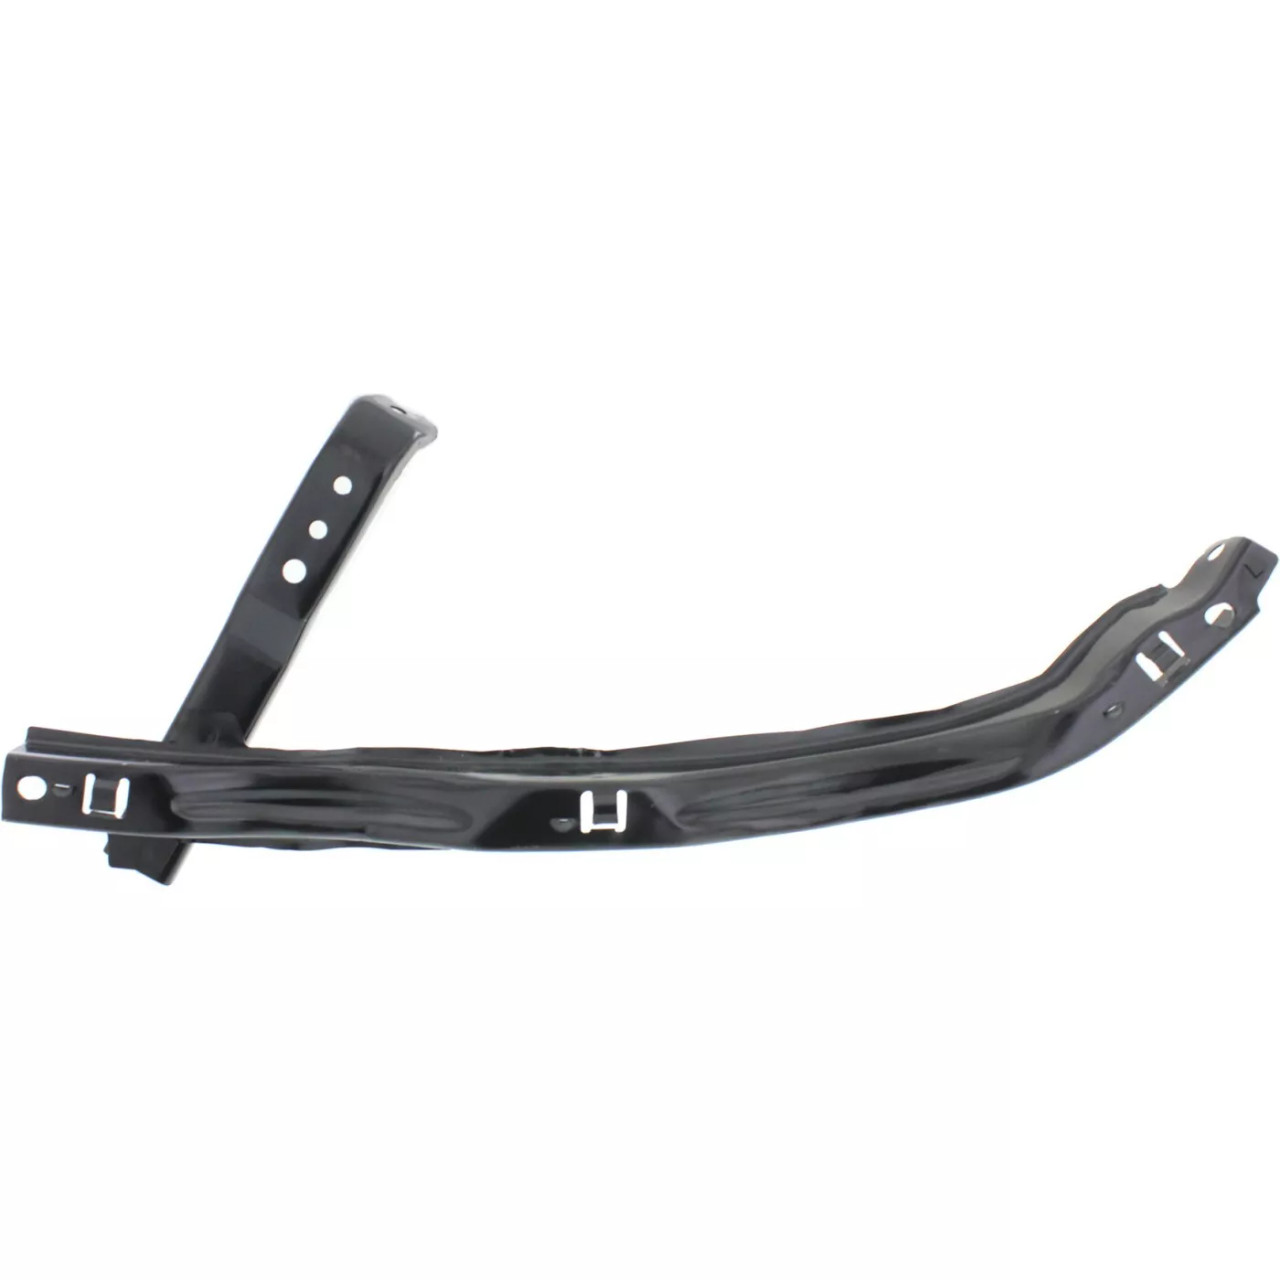 Bumper Bracket For 2002-2004 Acura RSX Set of 2 Front, Driver and Passenger Side